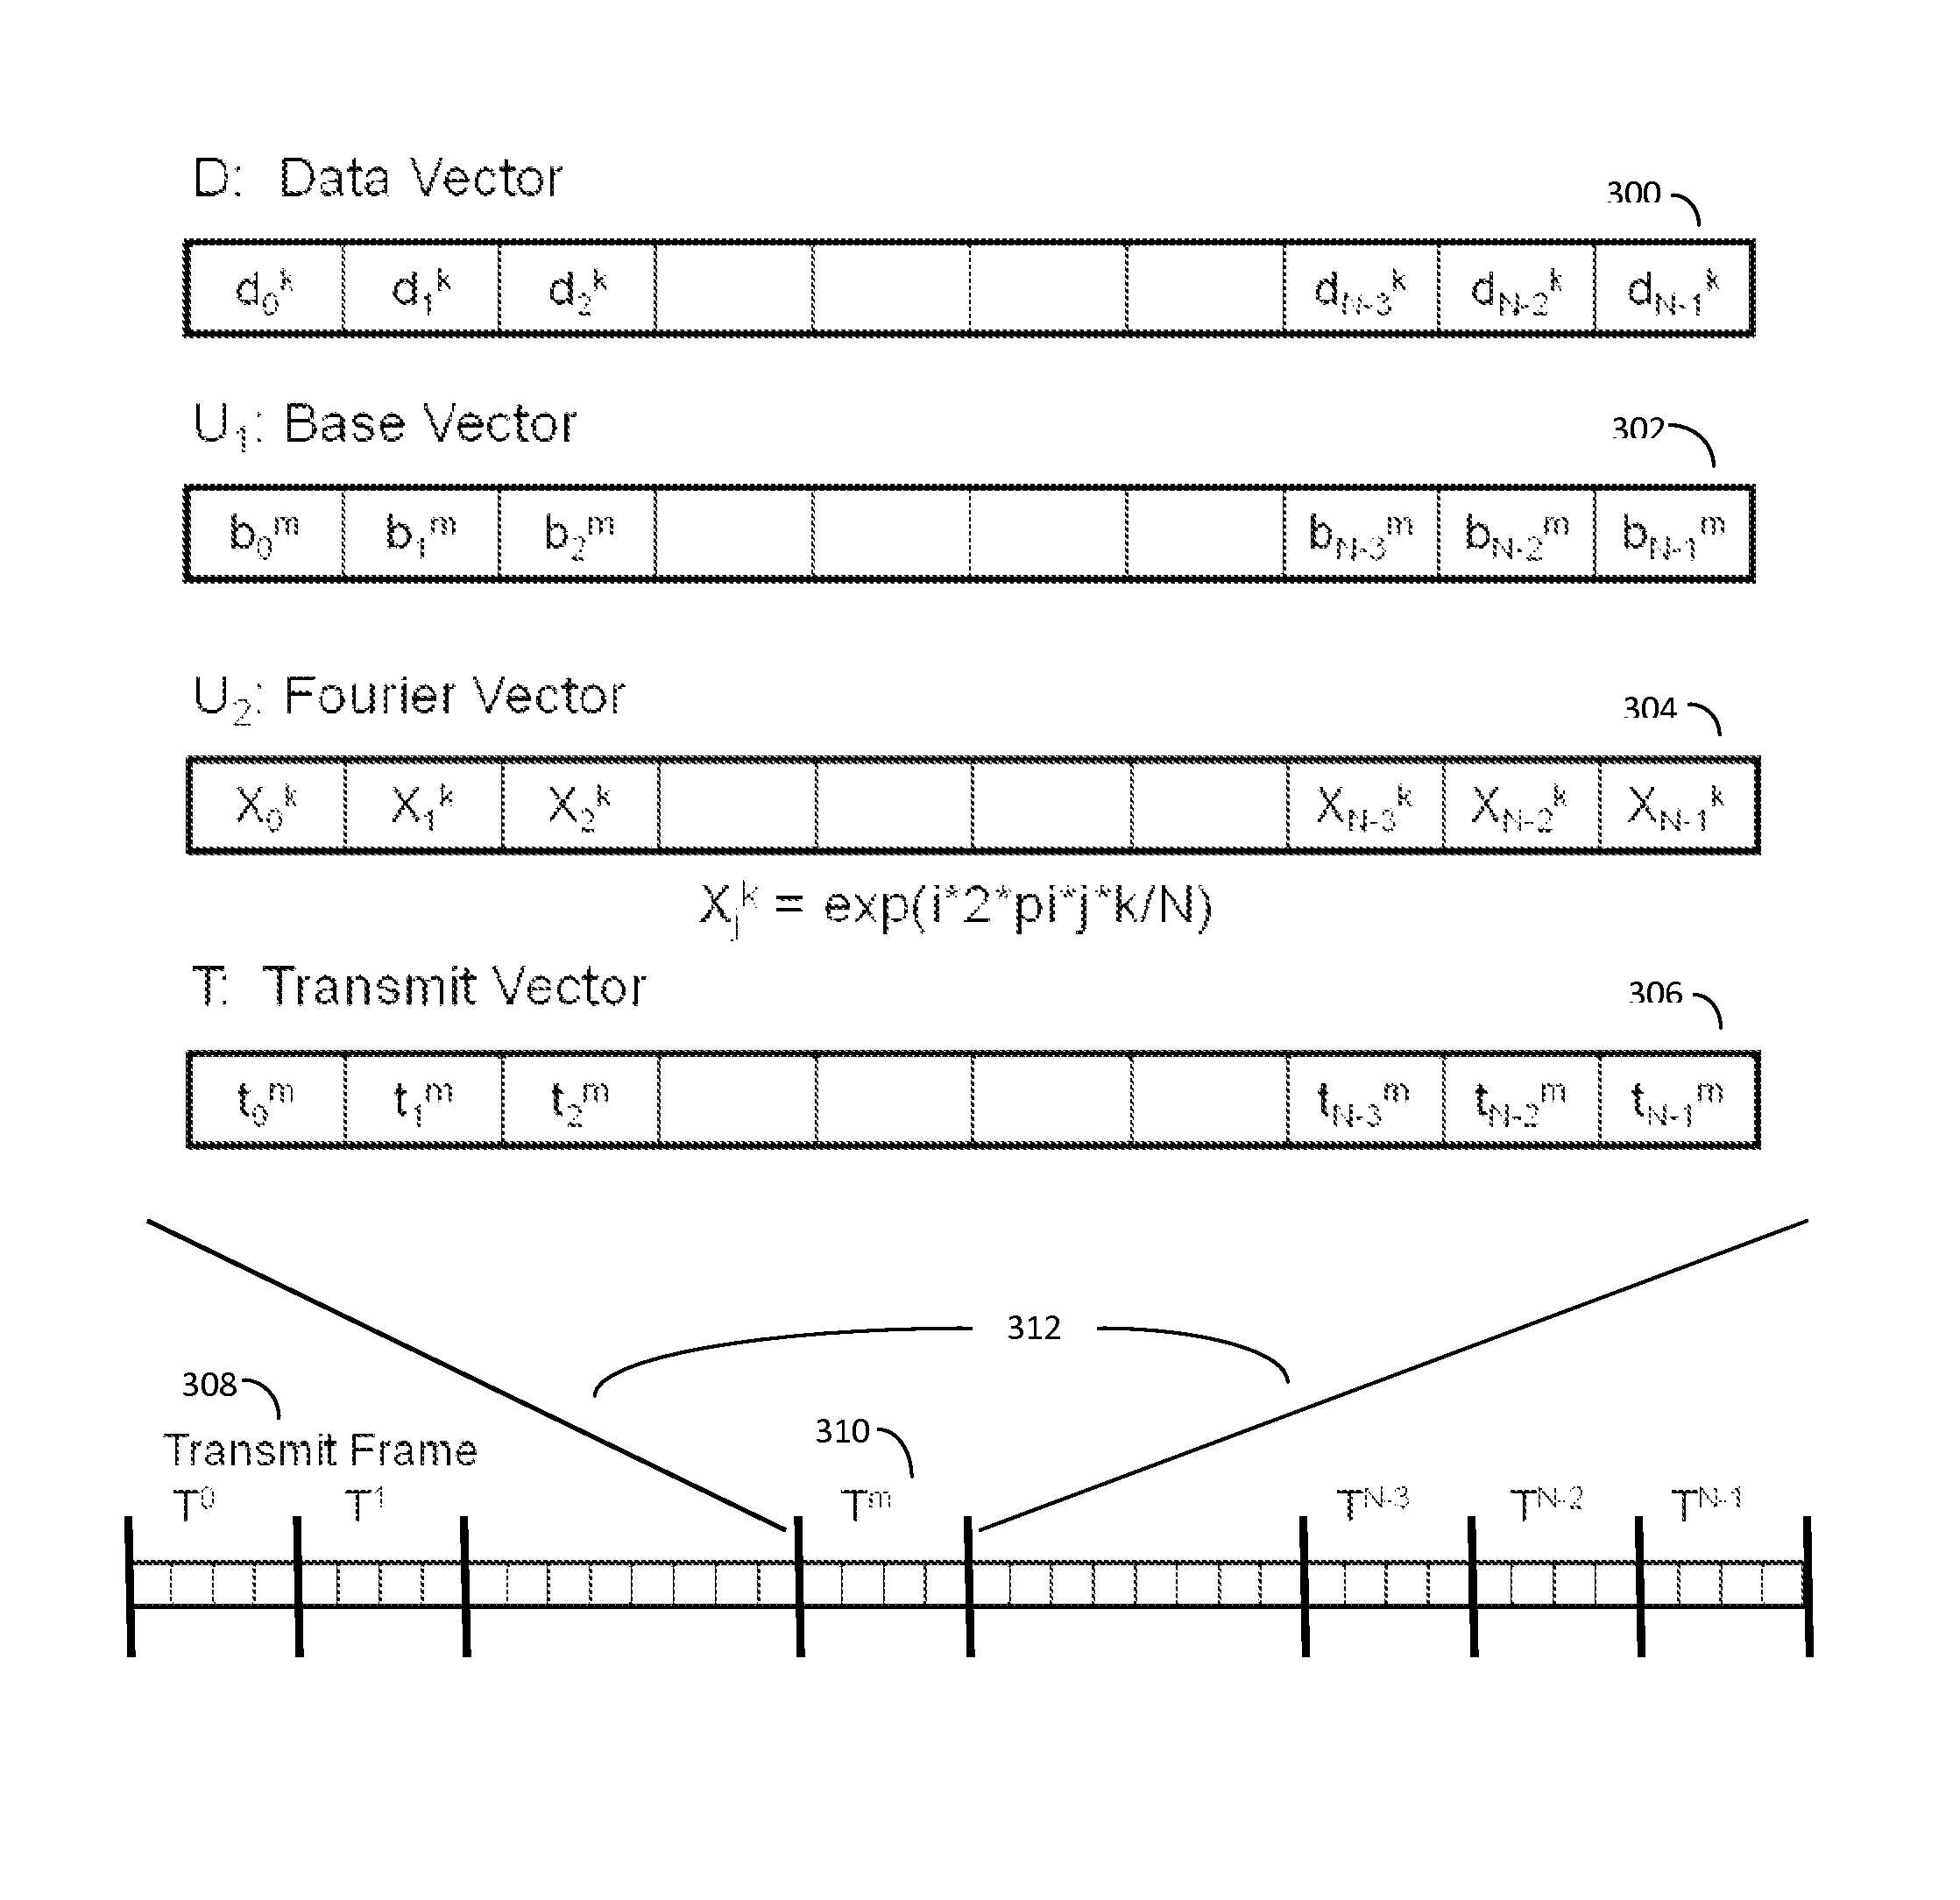 Signal modulation method resistant to echo reflections and frequency offsets